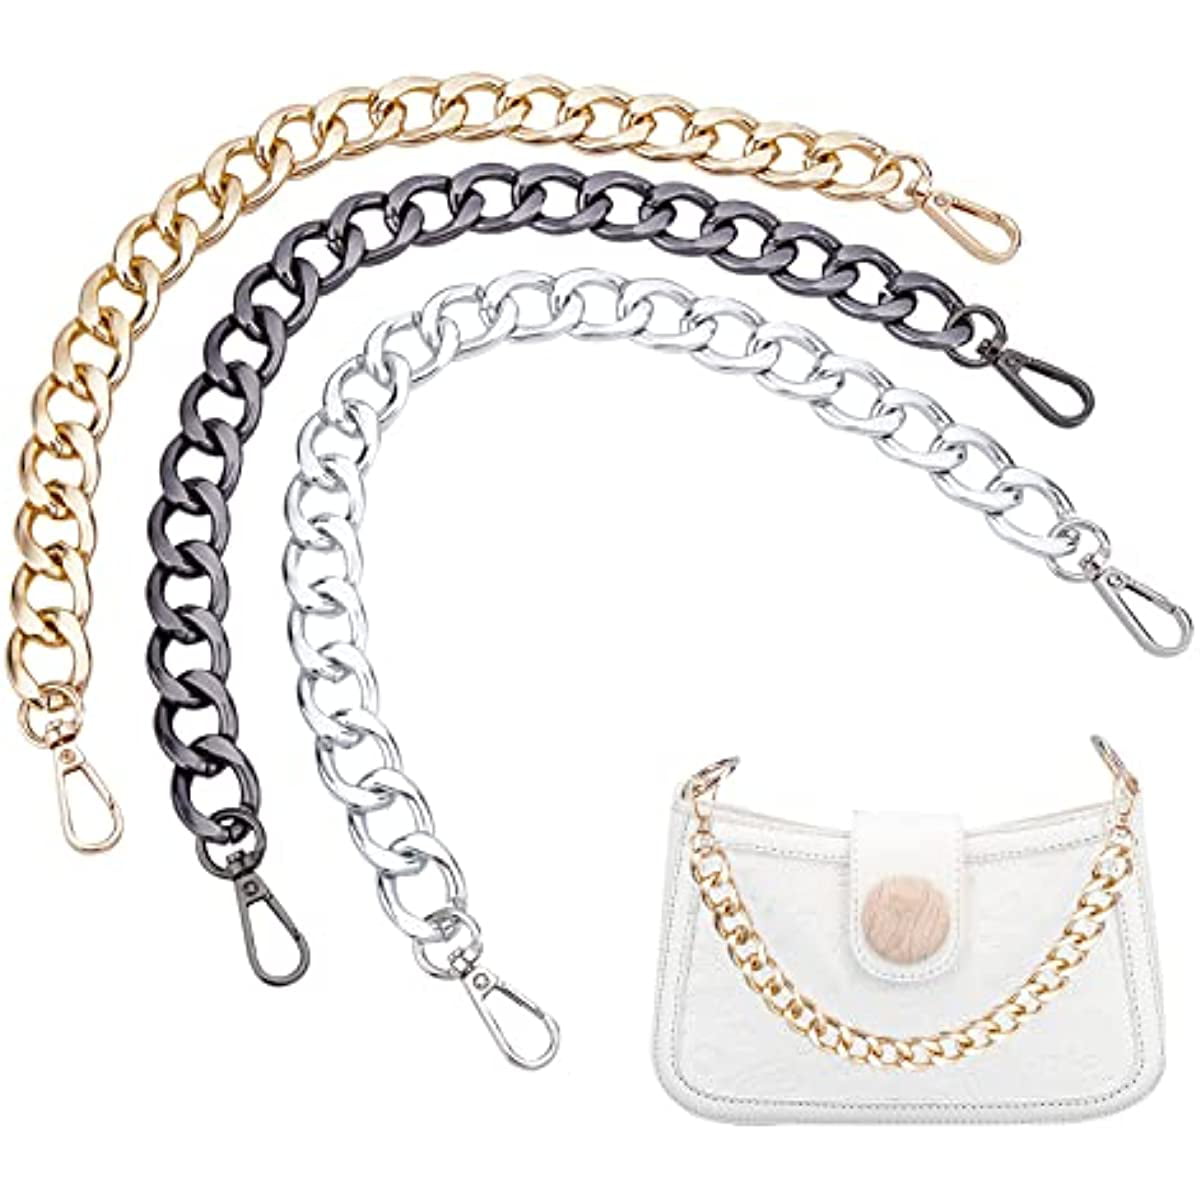 3 Colors 15 inch Bag Strap Chains Handbag Purse Handle Chunky Metal Shoulder Clutches Straps Bag Handle Replacement Decoration Chains with Clasps for